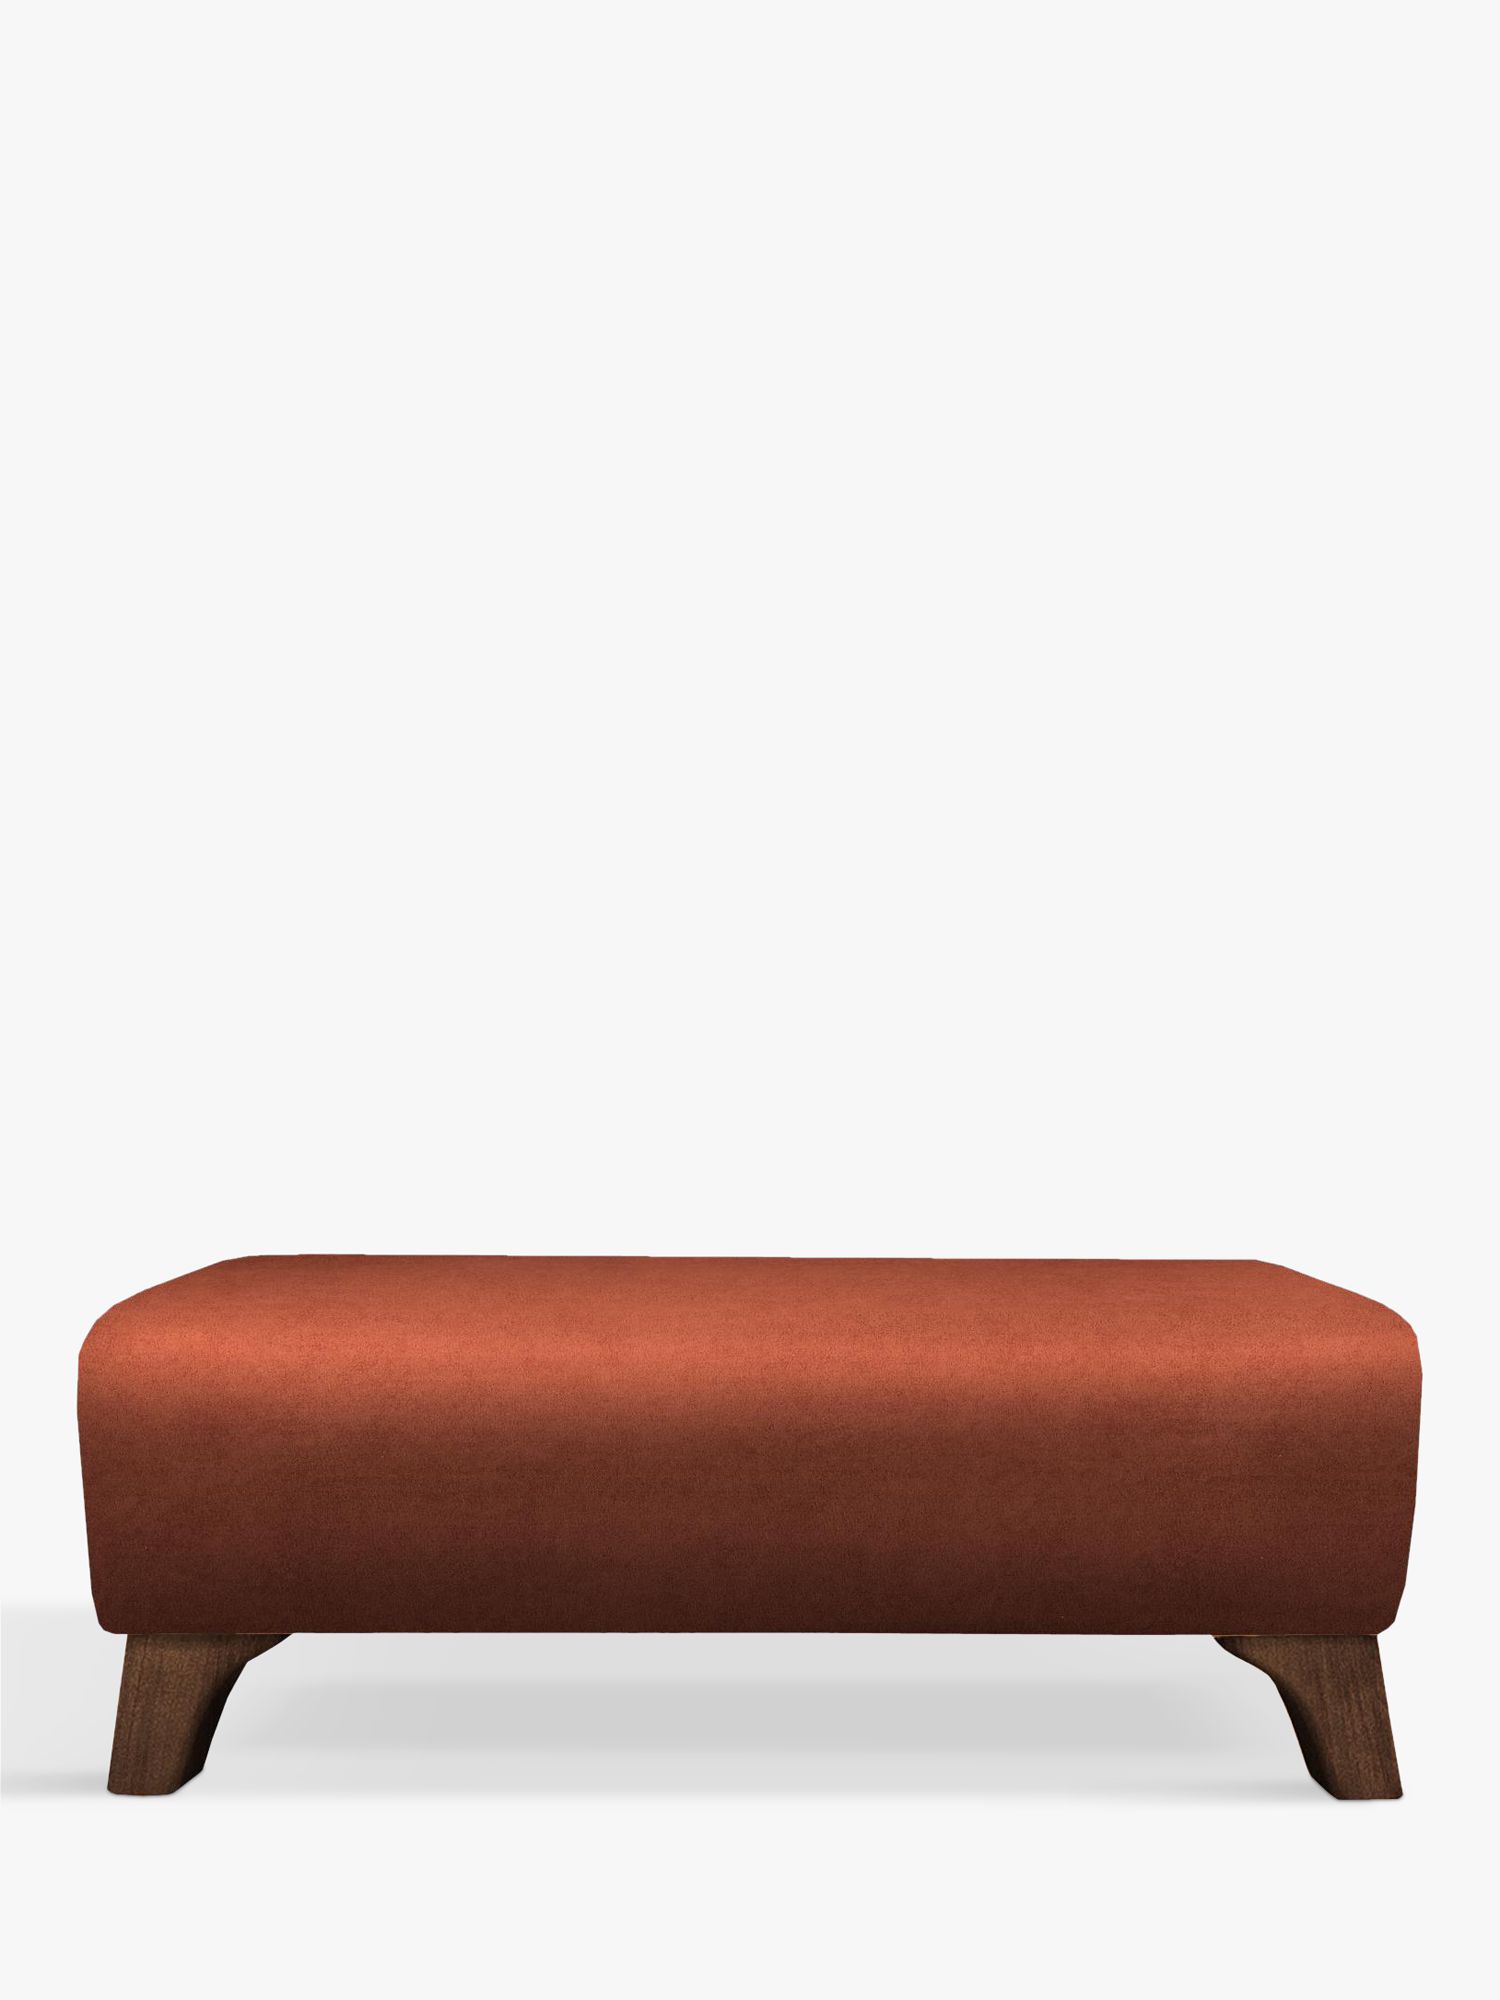 The Sixty Eight Range, G Plan Vintage The Sixty Eight Footstool, Plush Umber